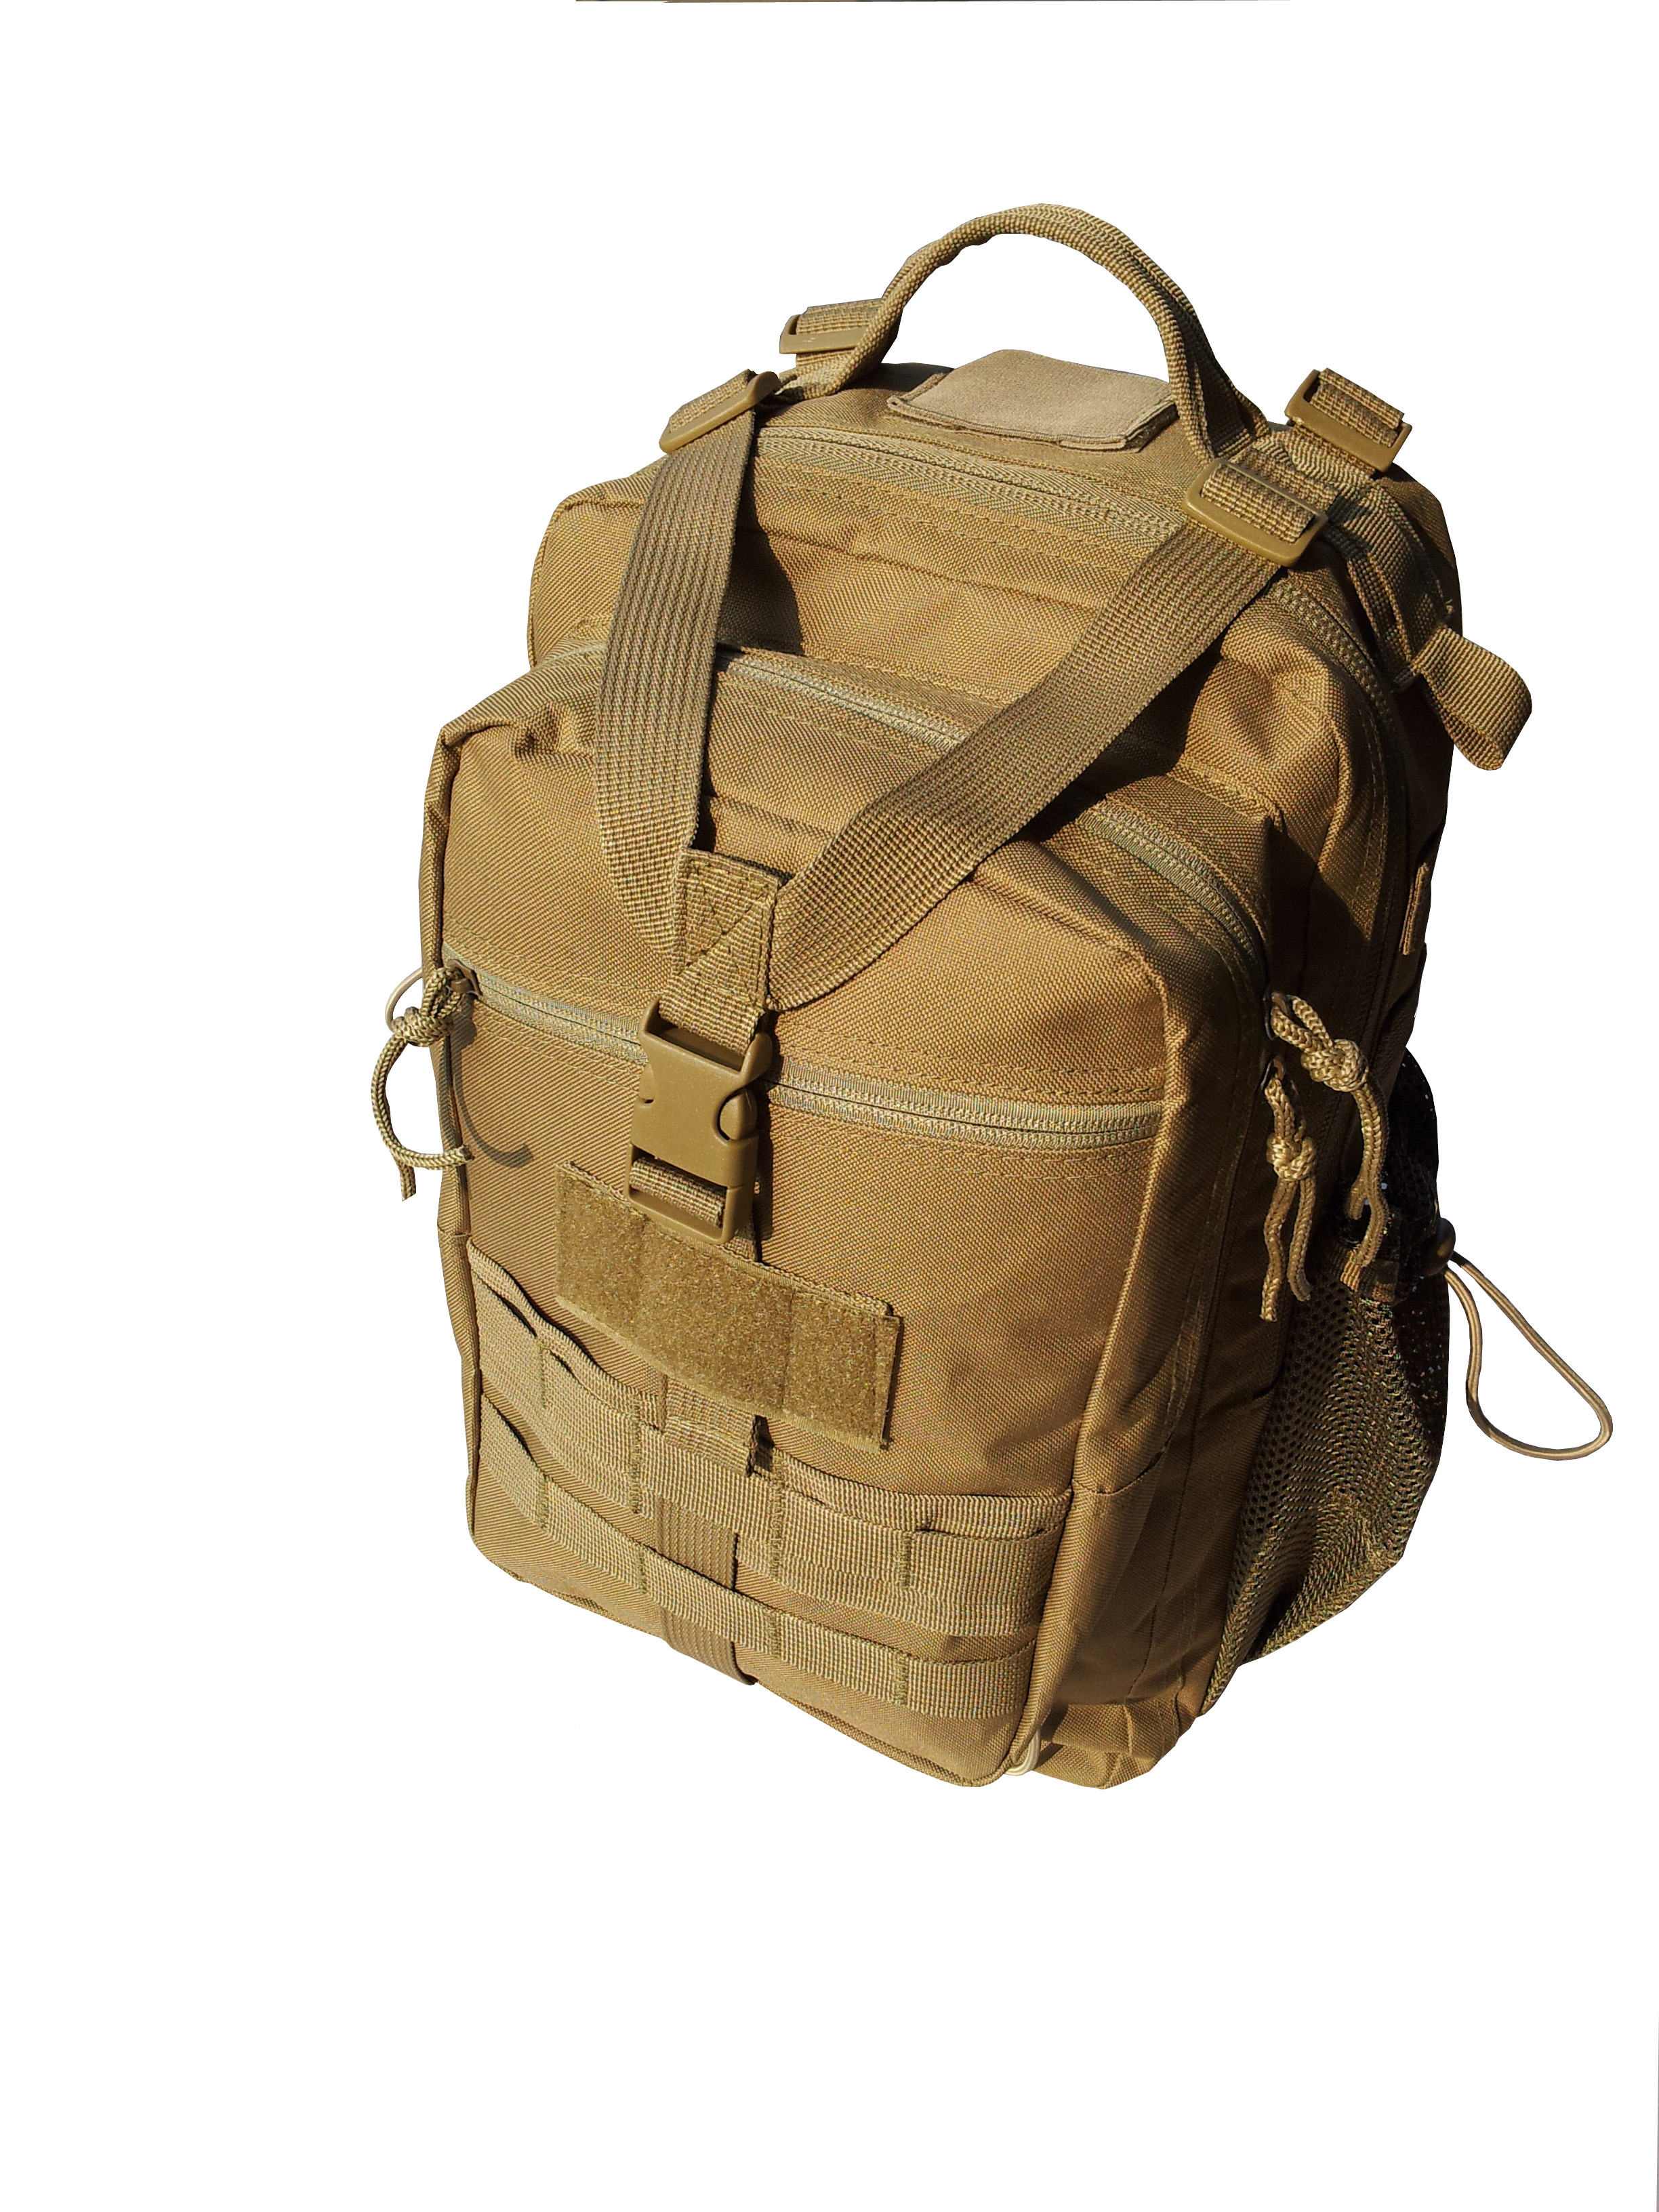 Military Backpack #MB-004 New 3P